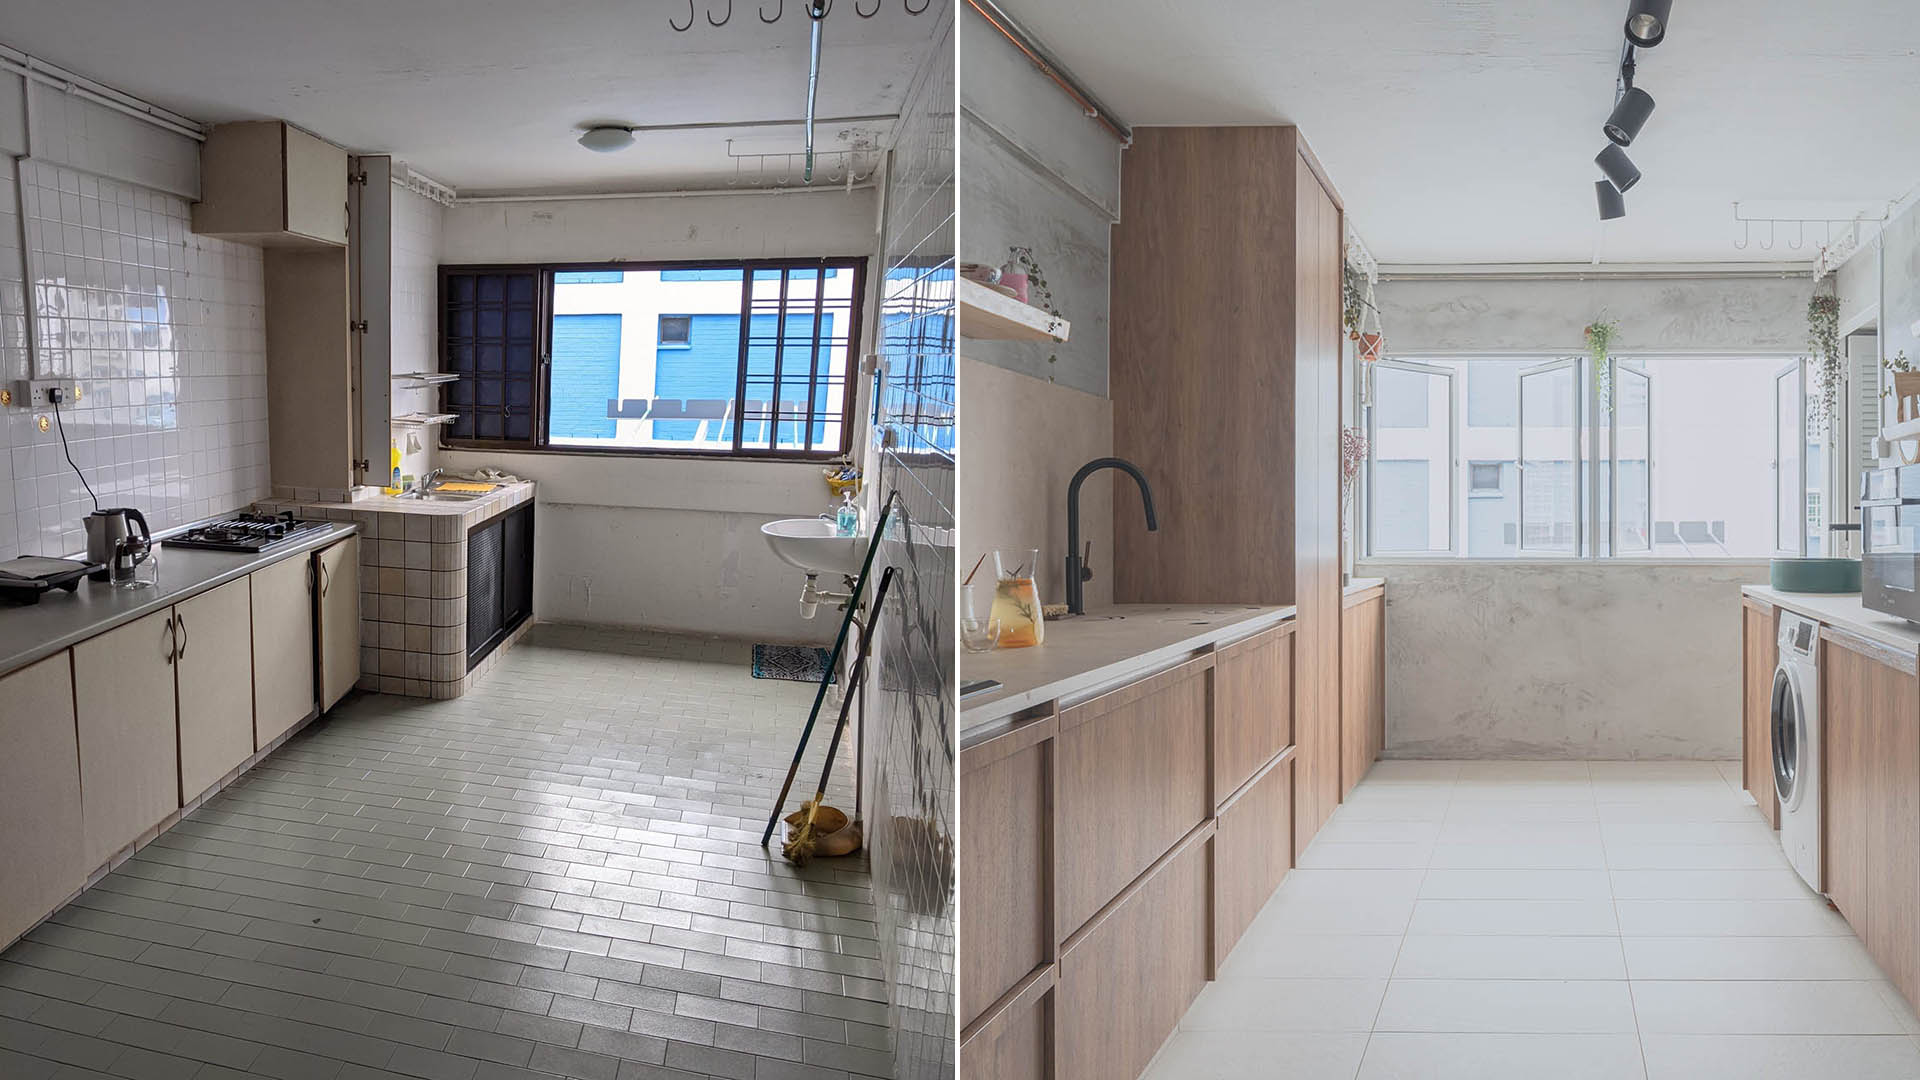 Kitchen: Before and after